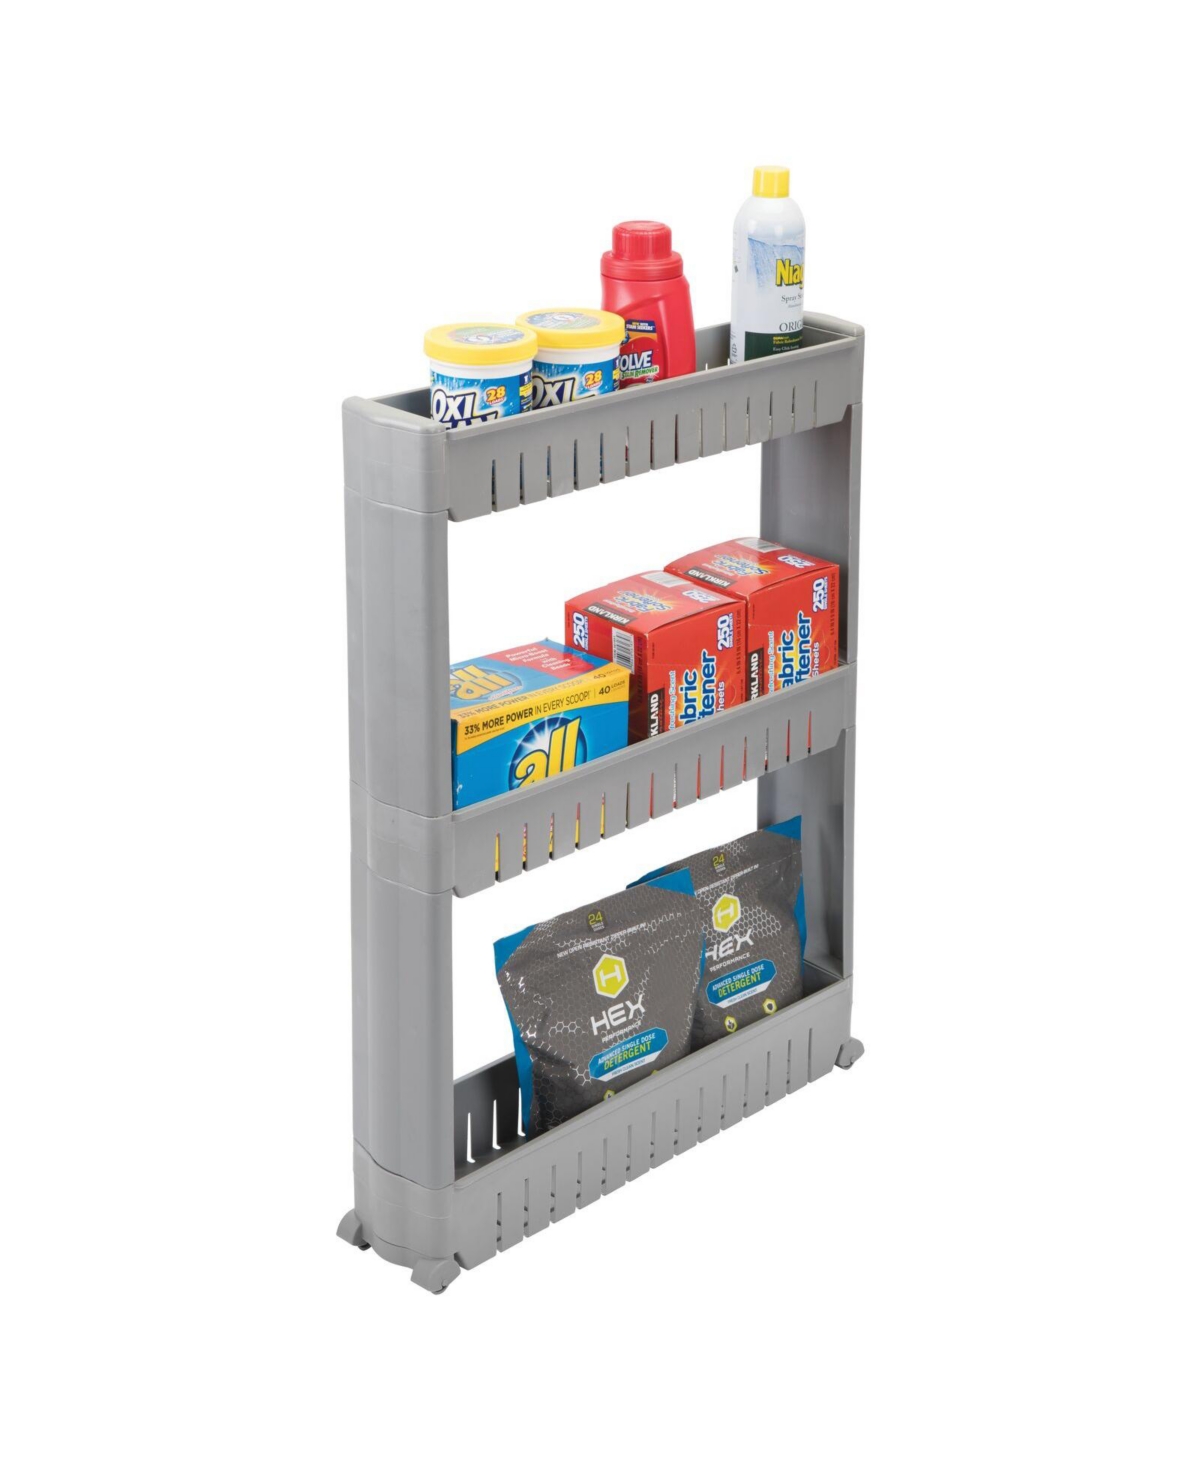 Slim Rolling Laundry Utility Cart Organizer with 3 Shelves - Gray - Gray